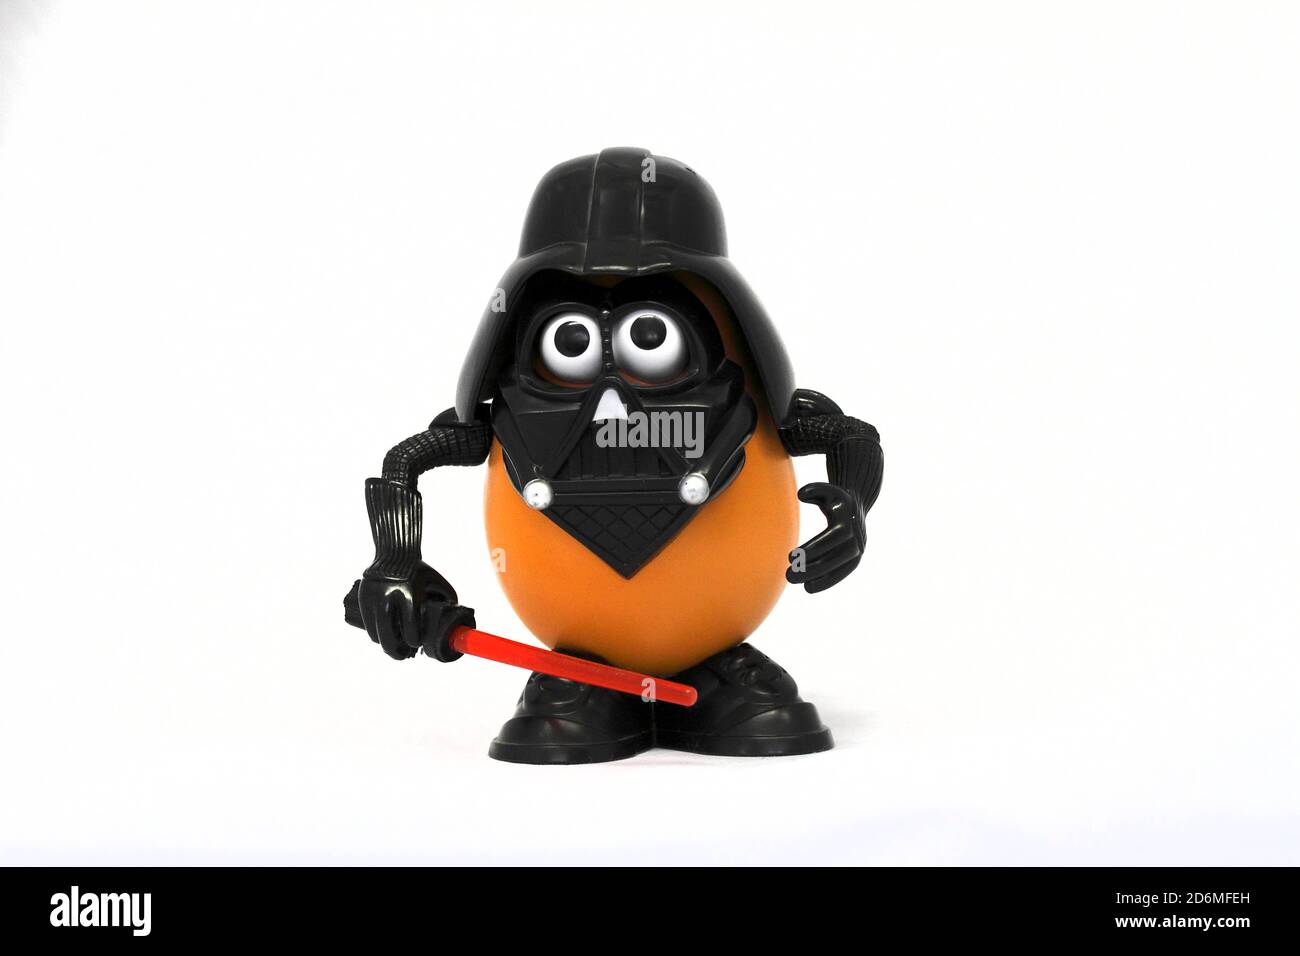 Where:  Nottingham When:  March 2020 Who:  Mr Potatoe Head - Darth vader Character What:  Chuildren's toy Why: Fun to play with  Description:  The Dar Stock Photo